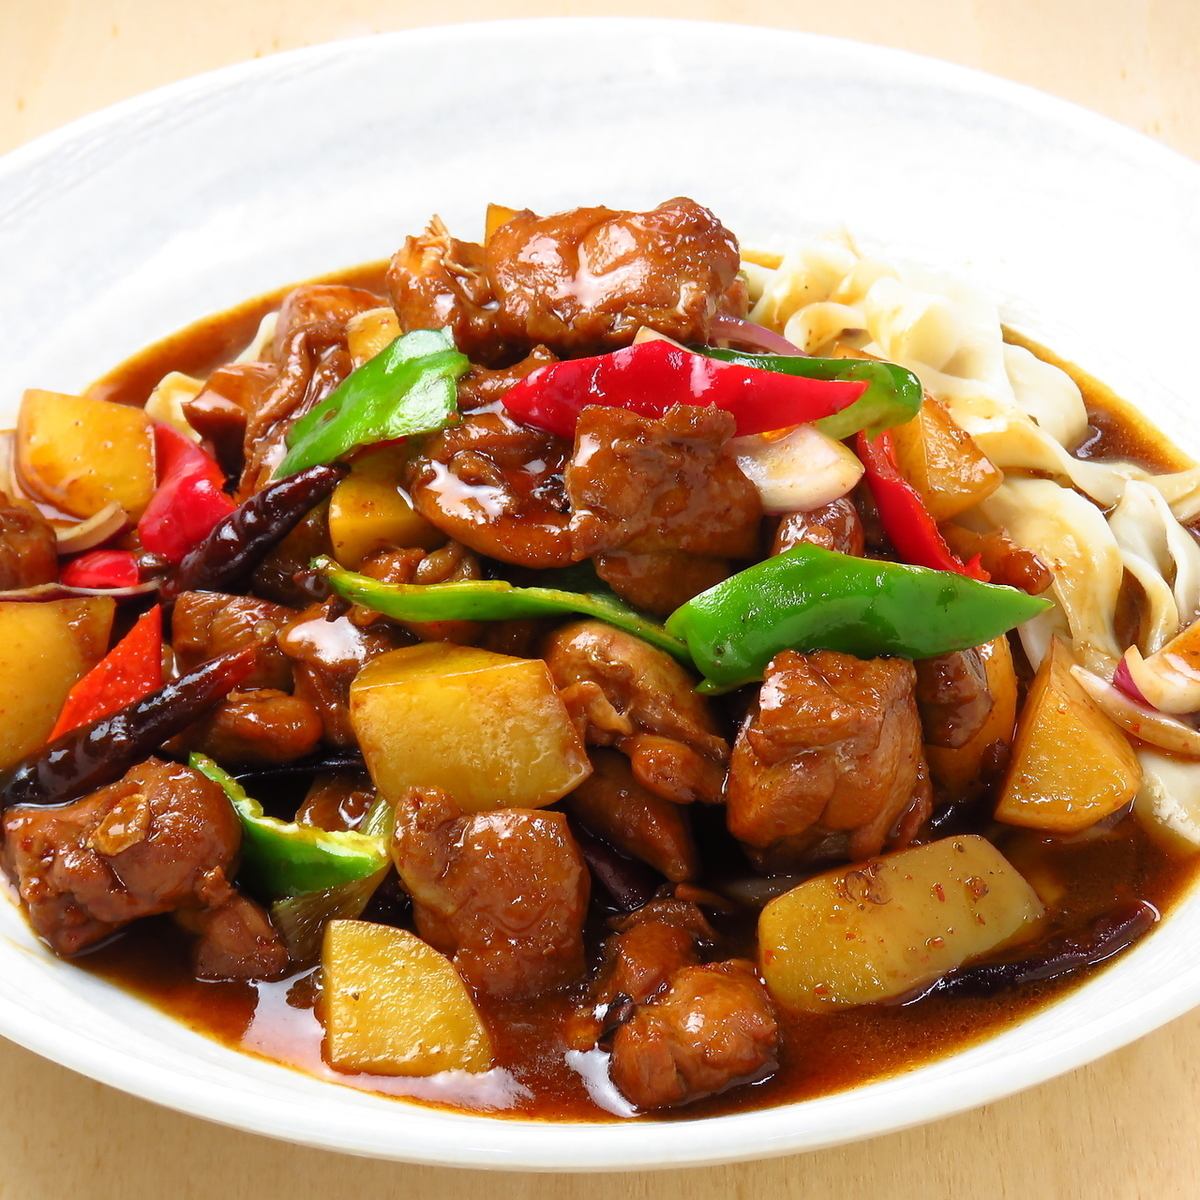 Halal Chinese restaurant ♪ Enjoy authentic cuisine prepared by a halal-certified authentic chef ☆